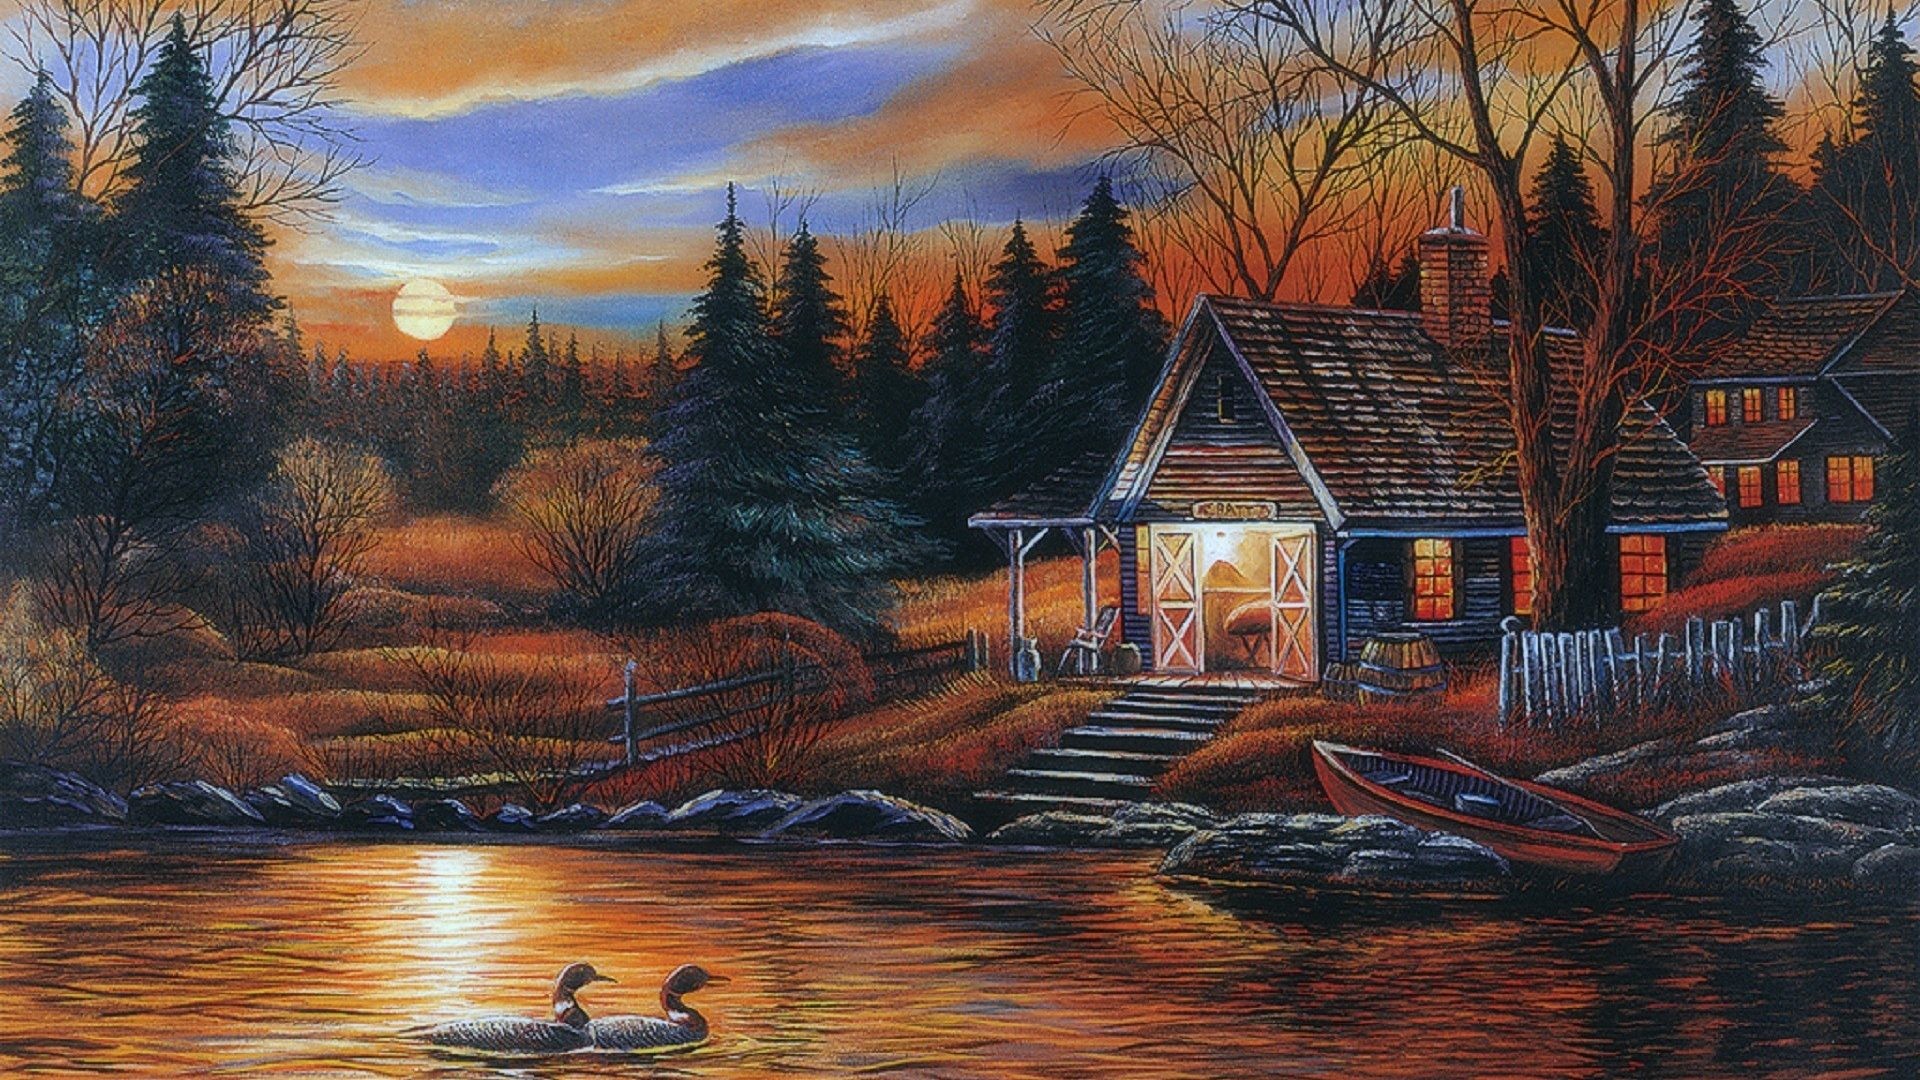 Paintings Tag – Romantic Lakeside Paintings Sunsets Animals Couple Love Four Seasons Cottages Lakes Attractions Dreams